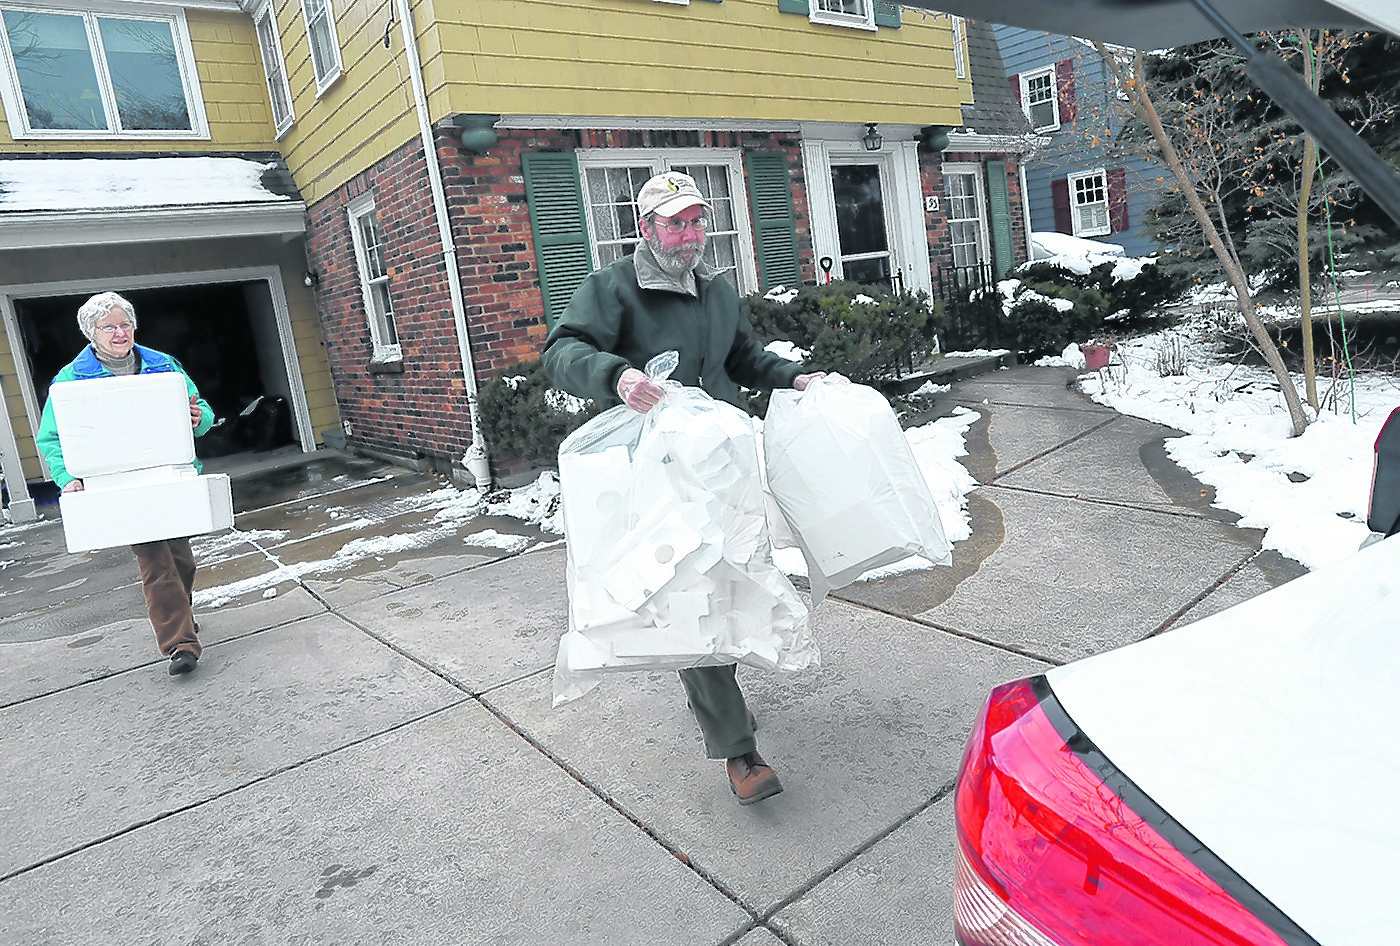 Mary and Peter Grace, parishioners from St. John the Baptist, load their truck with Styrofoam they collected during Mass at the Kenmore church. (Dan Cappellazzo/Staff Photographer)